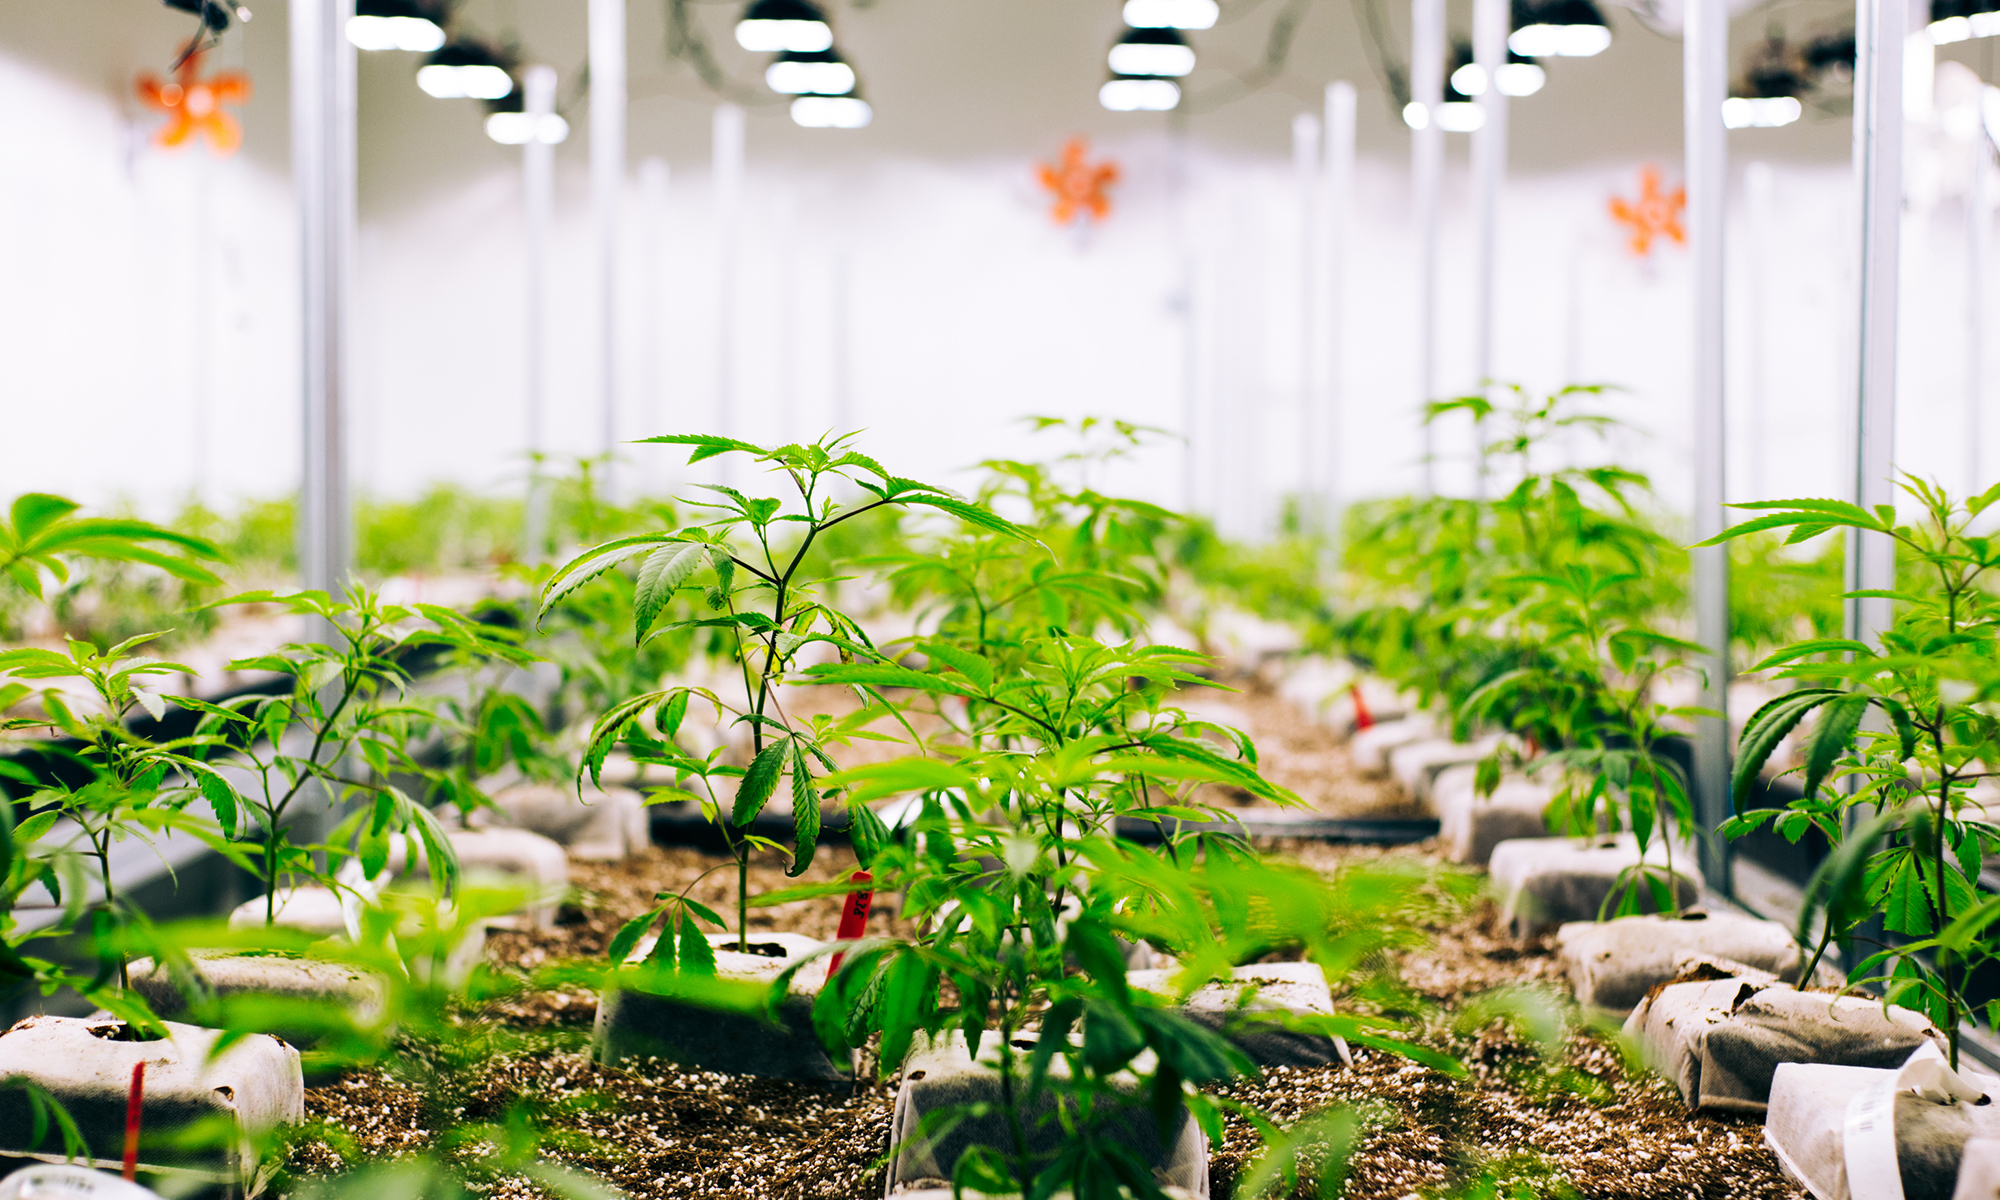 Growing cannabis indoors produces a lot of greenhouse gases – just